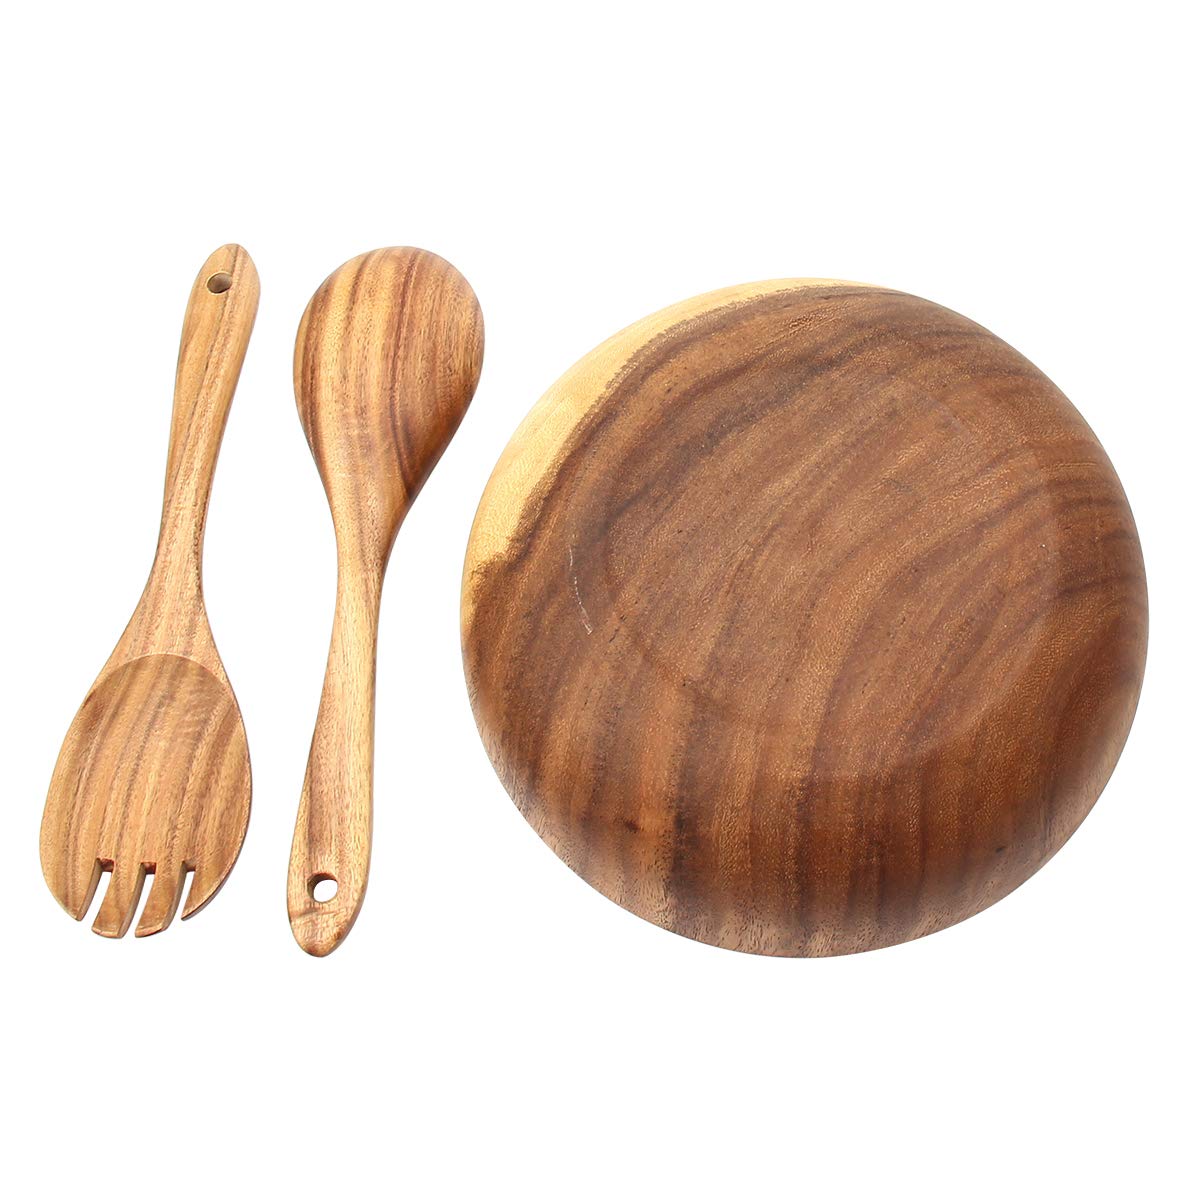 Mochiglory Acacia Woonden Salad Bowl with Servers Set, 9.4inchs Large Salad Wooden Bowl with Spoon and Fork for Fruits or Salads（Set of 3）